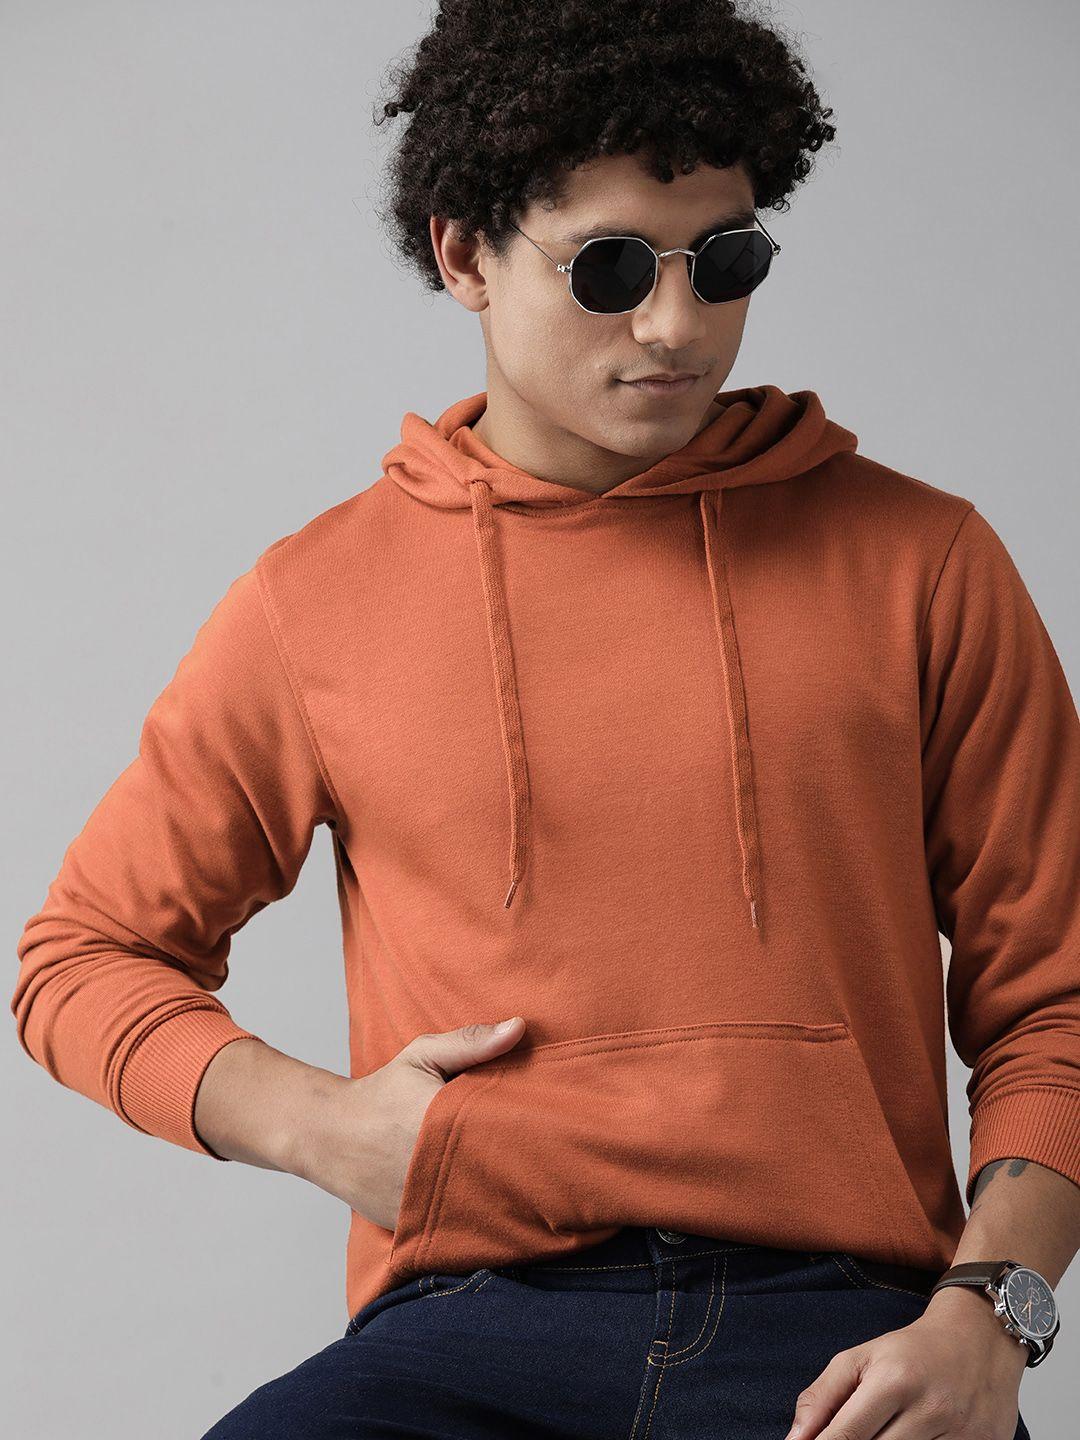 the roadster lifestyle co. hooded knitted sweatshirt